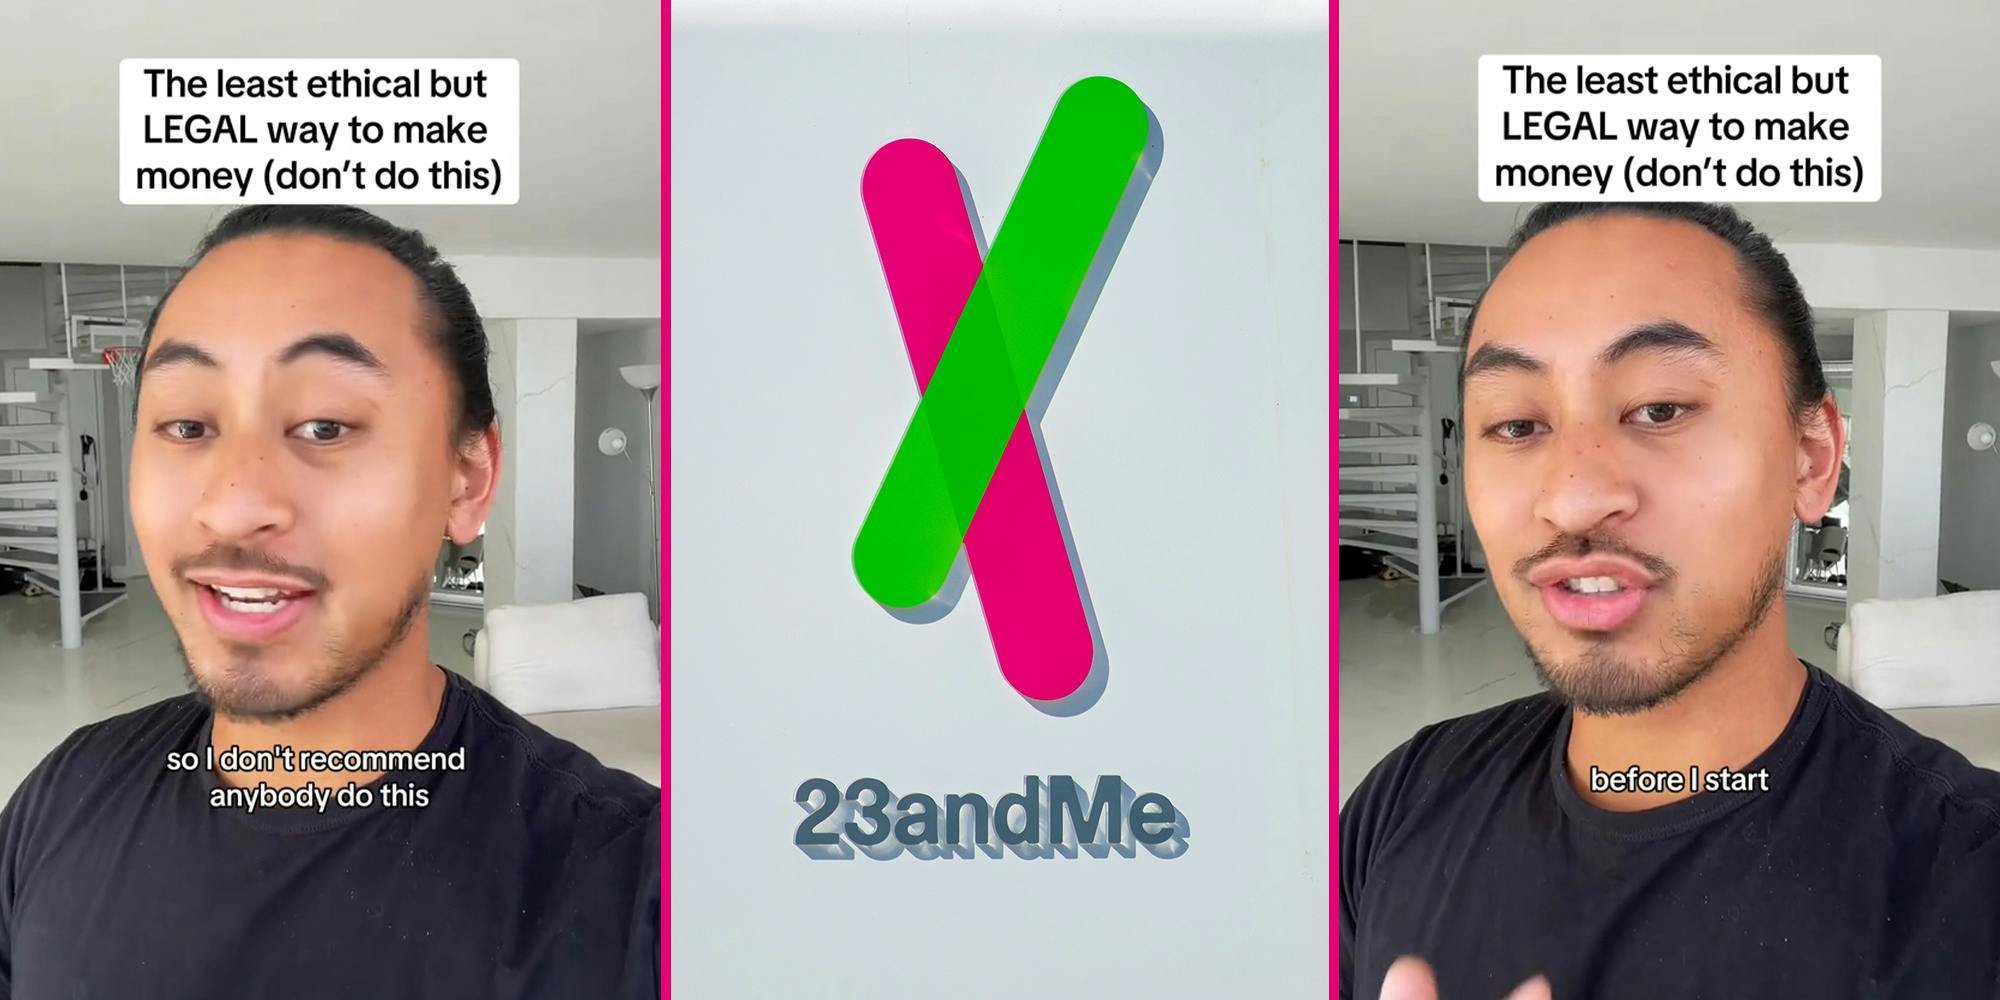 ‘I’m just mad I didn’t think of it first’: Entrepreneur shares ‘easiest’ way to make $20,000 with 23andMe. No, you don’t have to take a DNA test